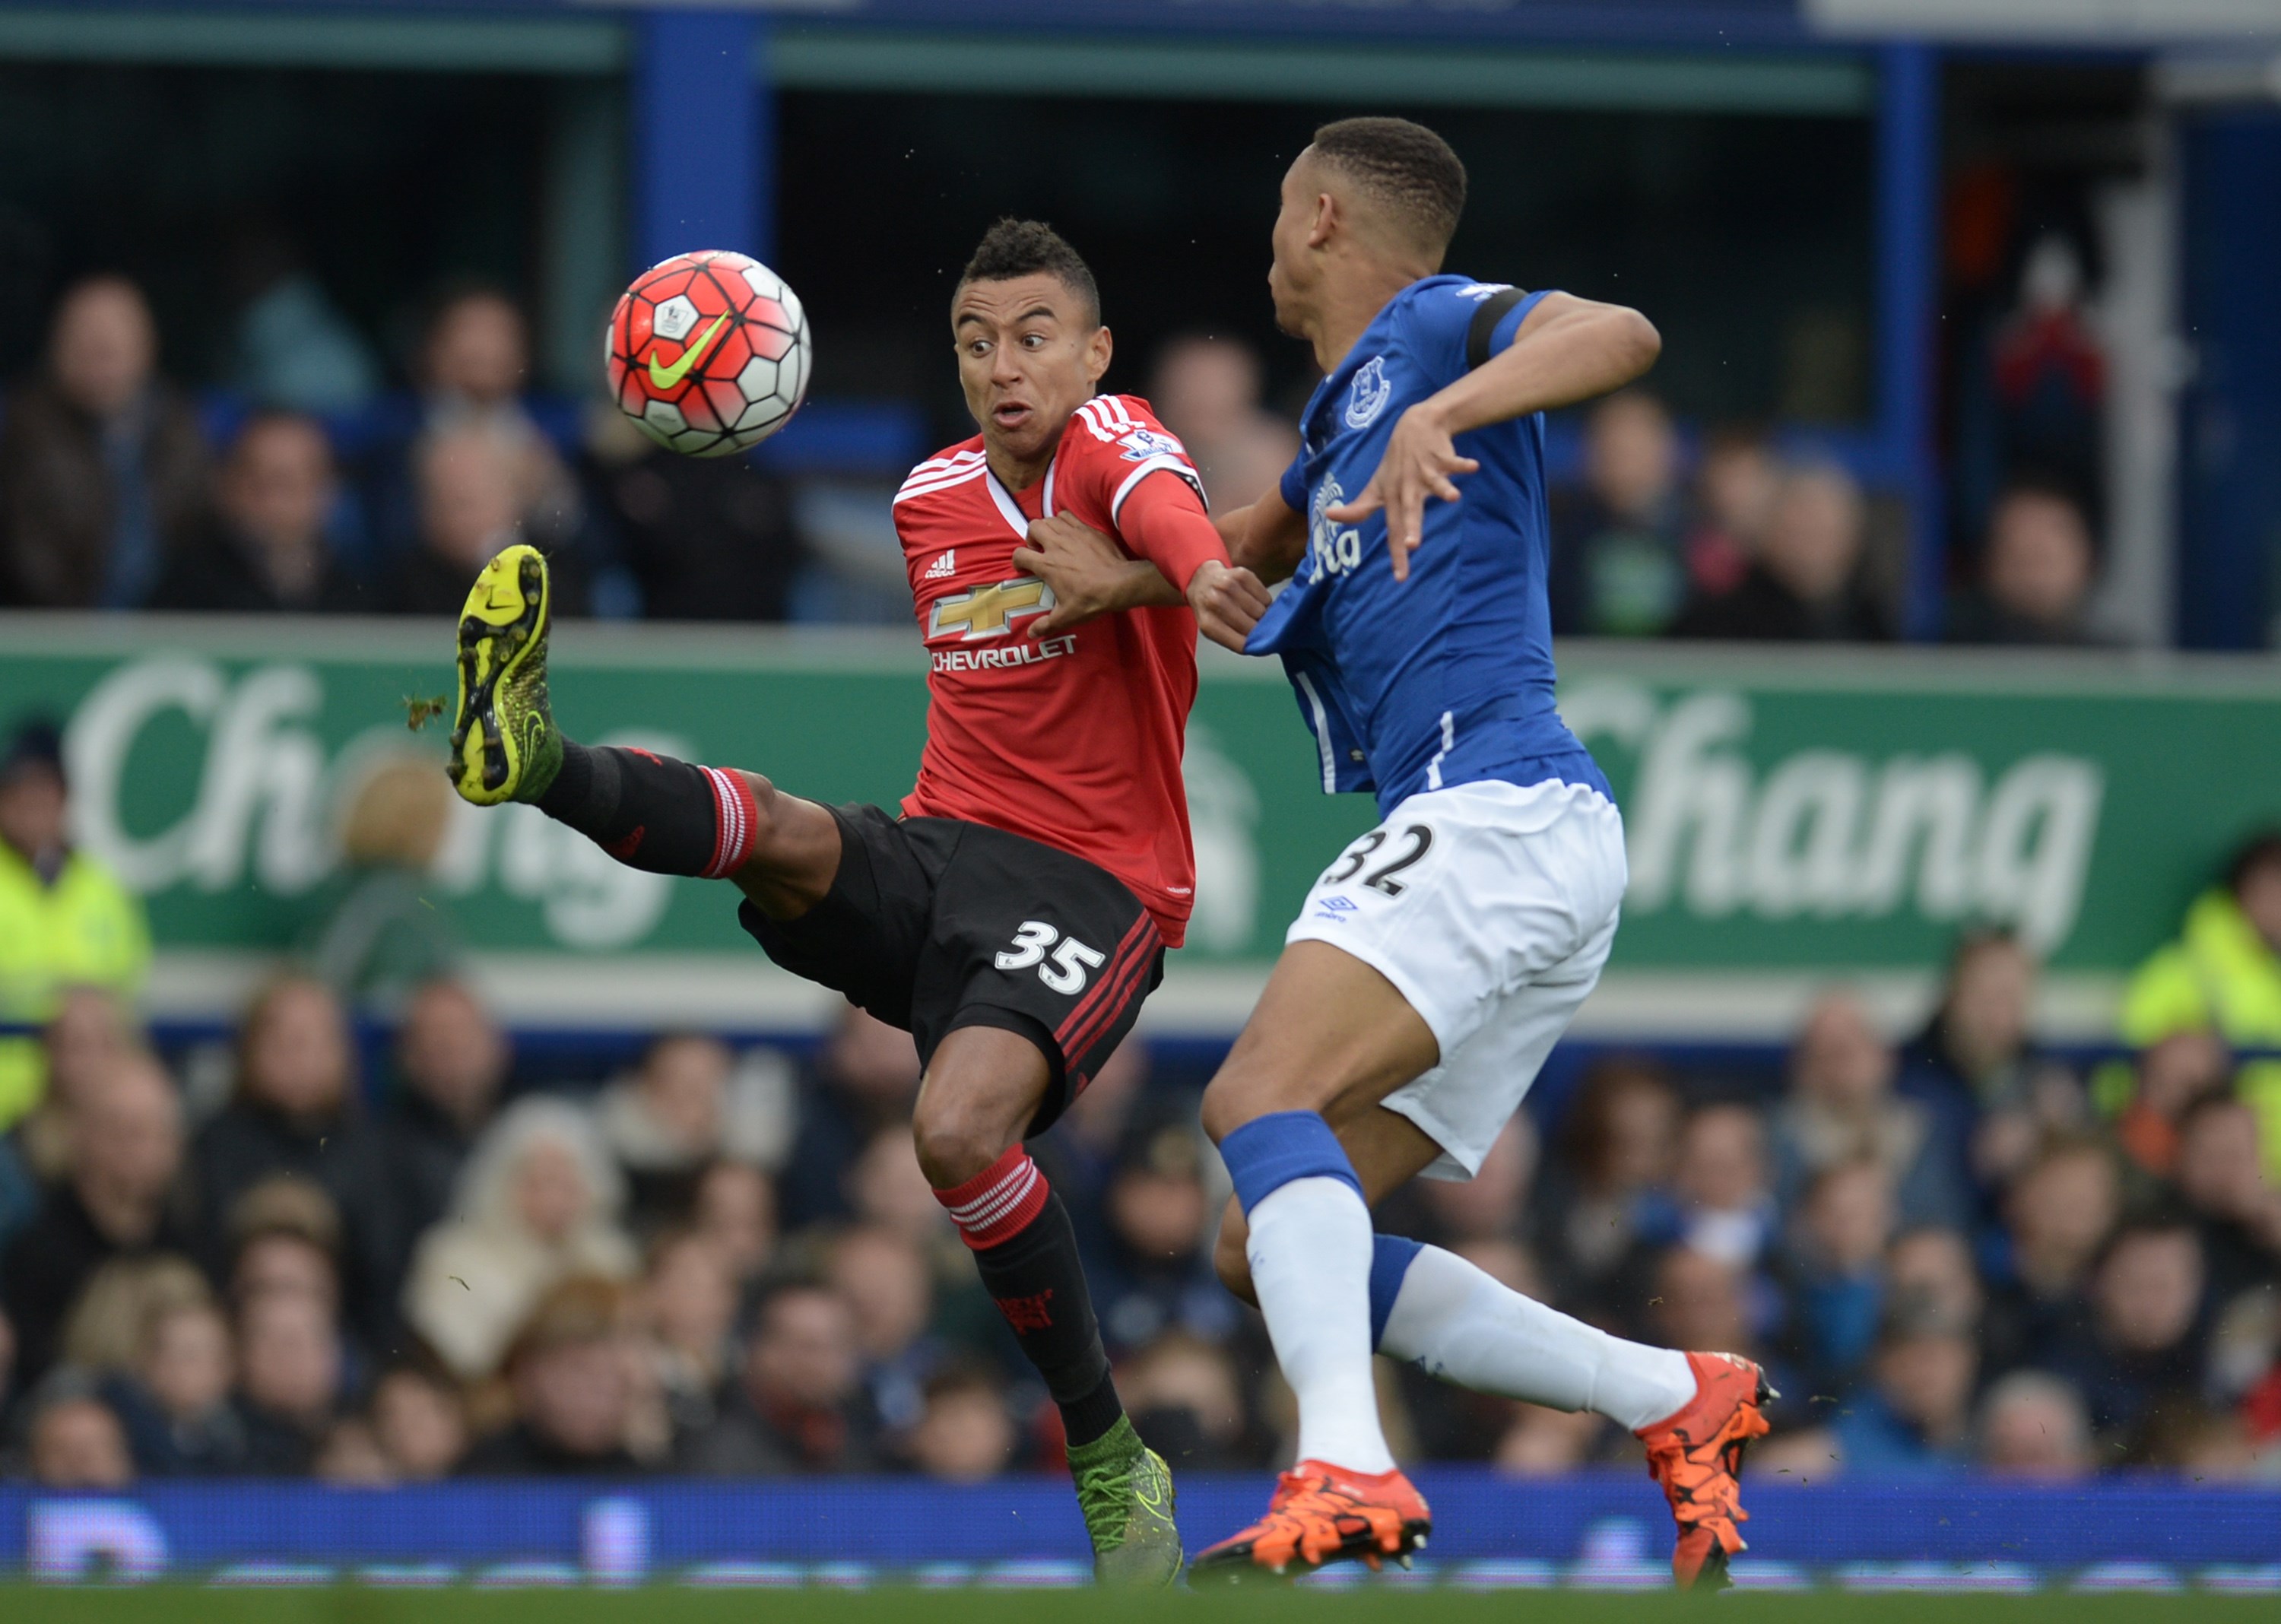 Manchester United's English midfielder Jesse Lingard (L) vies with Everton's Zimbabwean midfielder Brendan Galloway during the English Premier League football match between Everton and Manchester United at Goodison Park in Liverpool, north-west England, on October 17, 2015. AFP PHOTO / OLI SCARFF RESTRICTED TO EDITORIAL USE. No use with unauthorized audio, video, data, fixture lists, club/league logos or 'live' services. Online in-match use limited to 75 images, no video emulation. No use in betting, games or single club/league/player publications. (Photo credit should read OLI SCARFF/AFP/Getty Images)